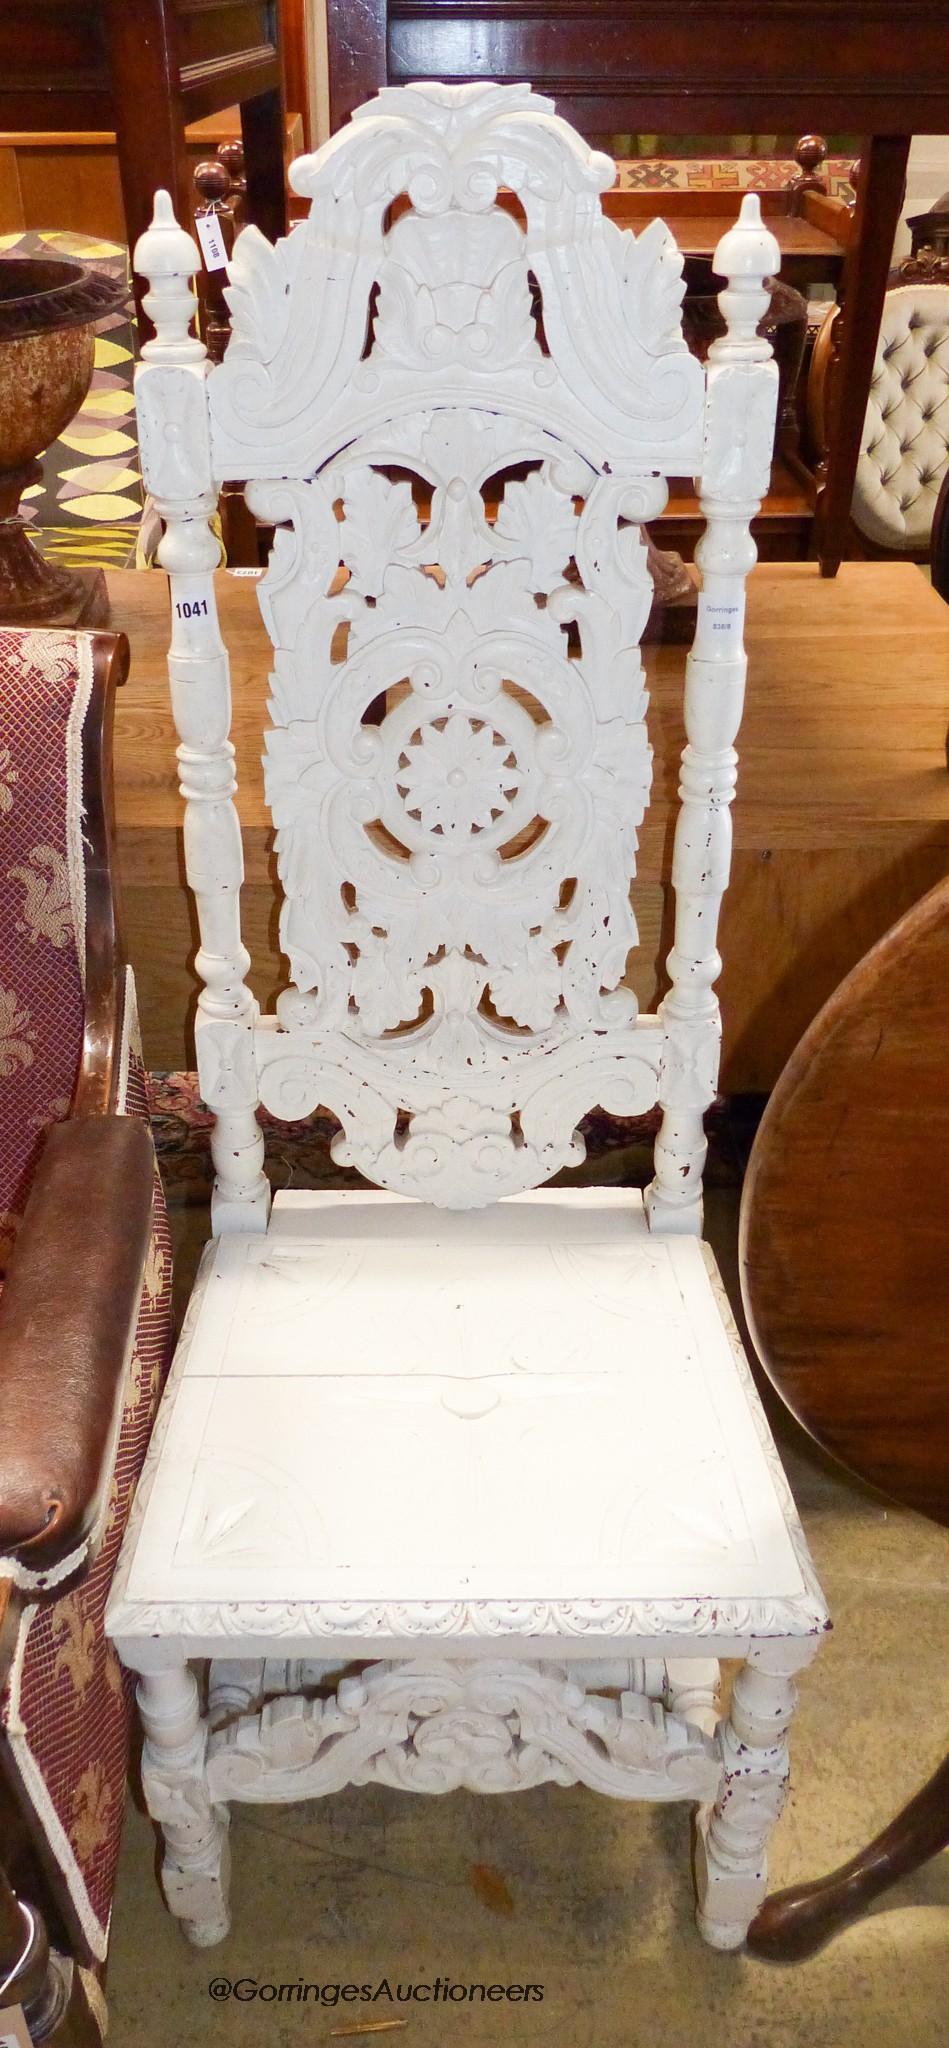 A 17th century style white painted side chair